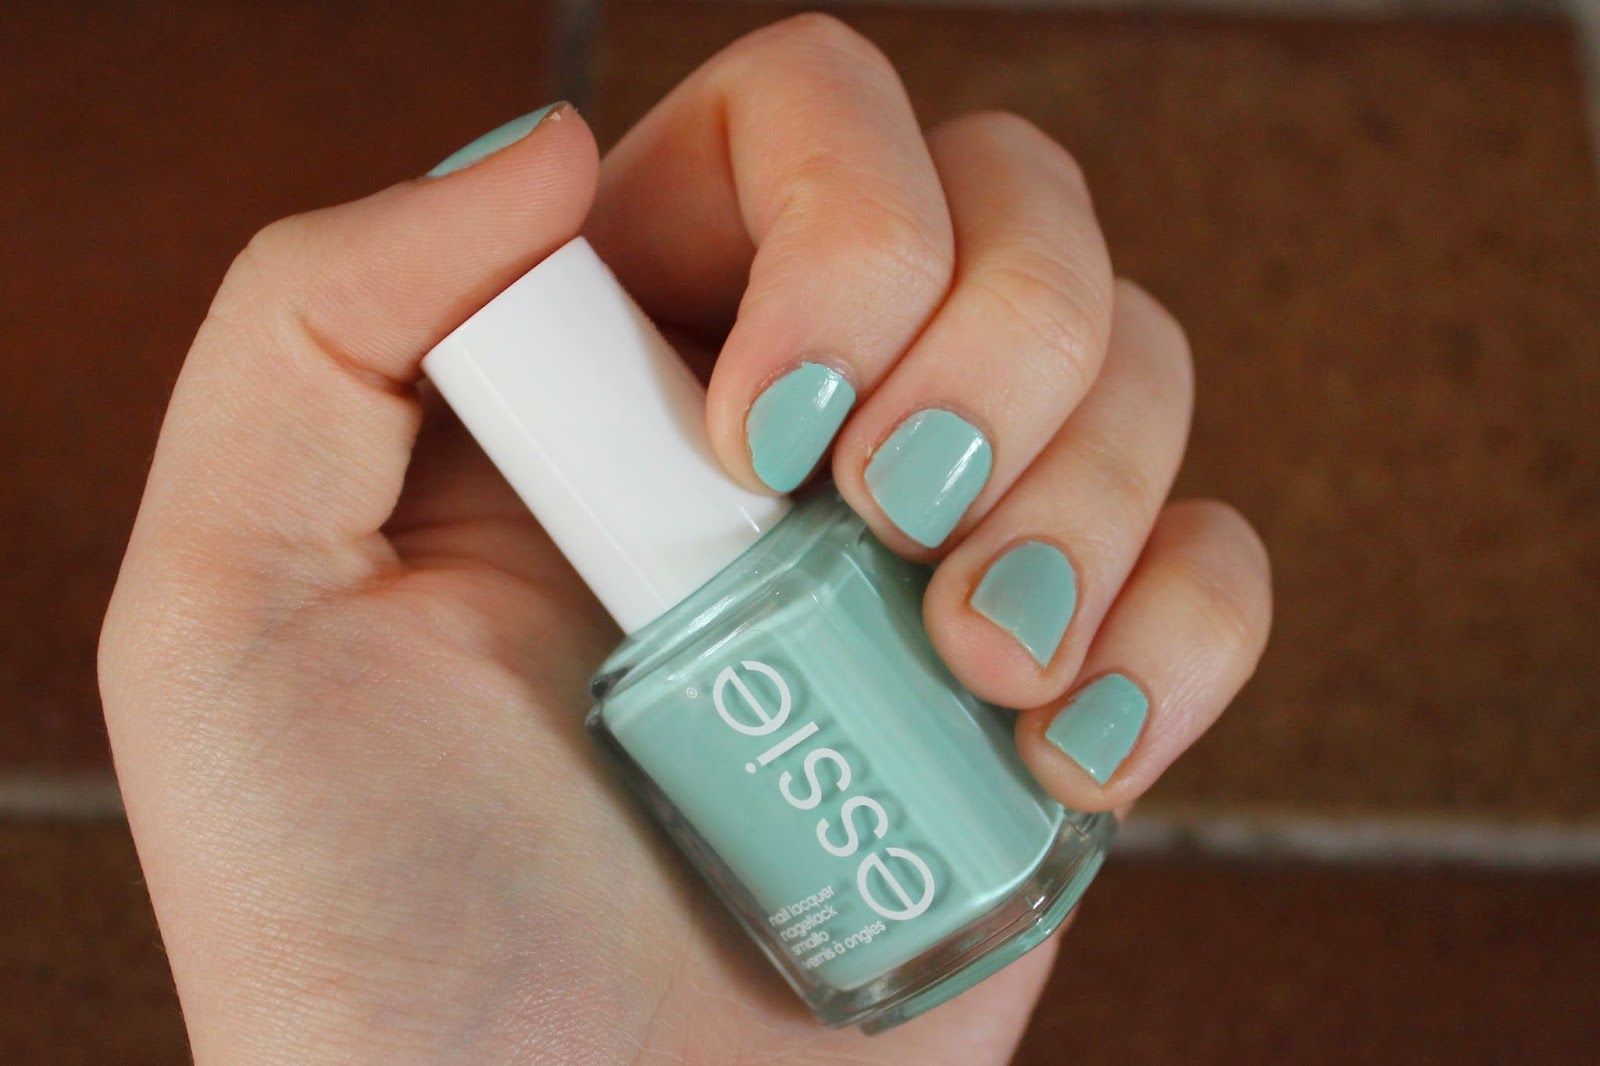 3. Essie Nail Polish in "Mint Candy Apple" - wide 1